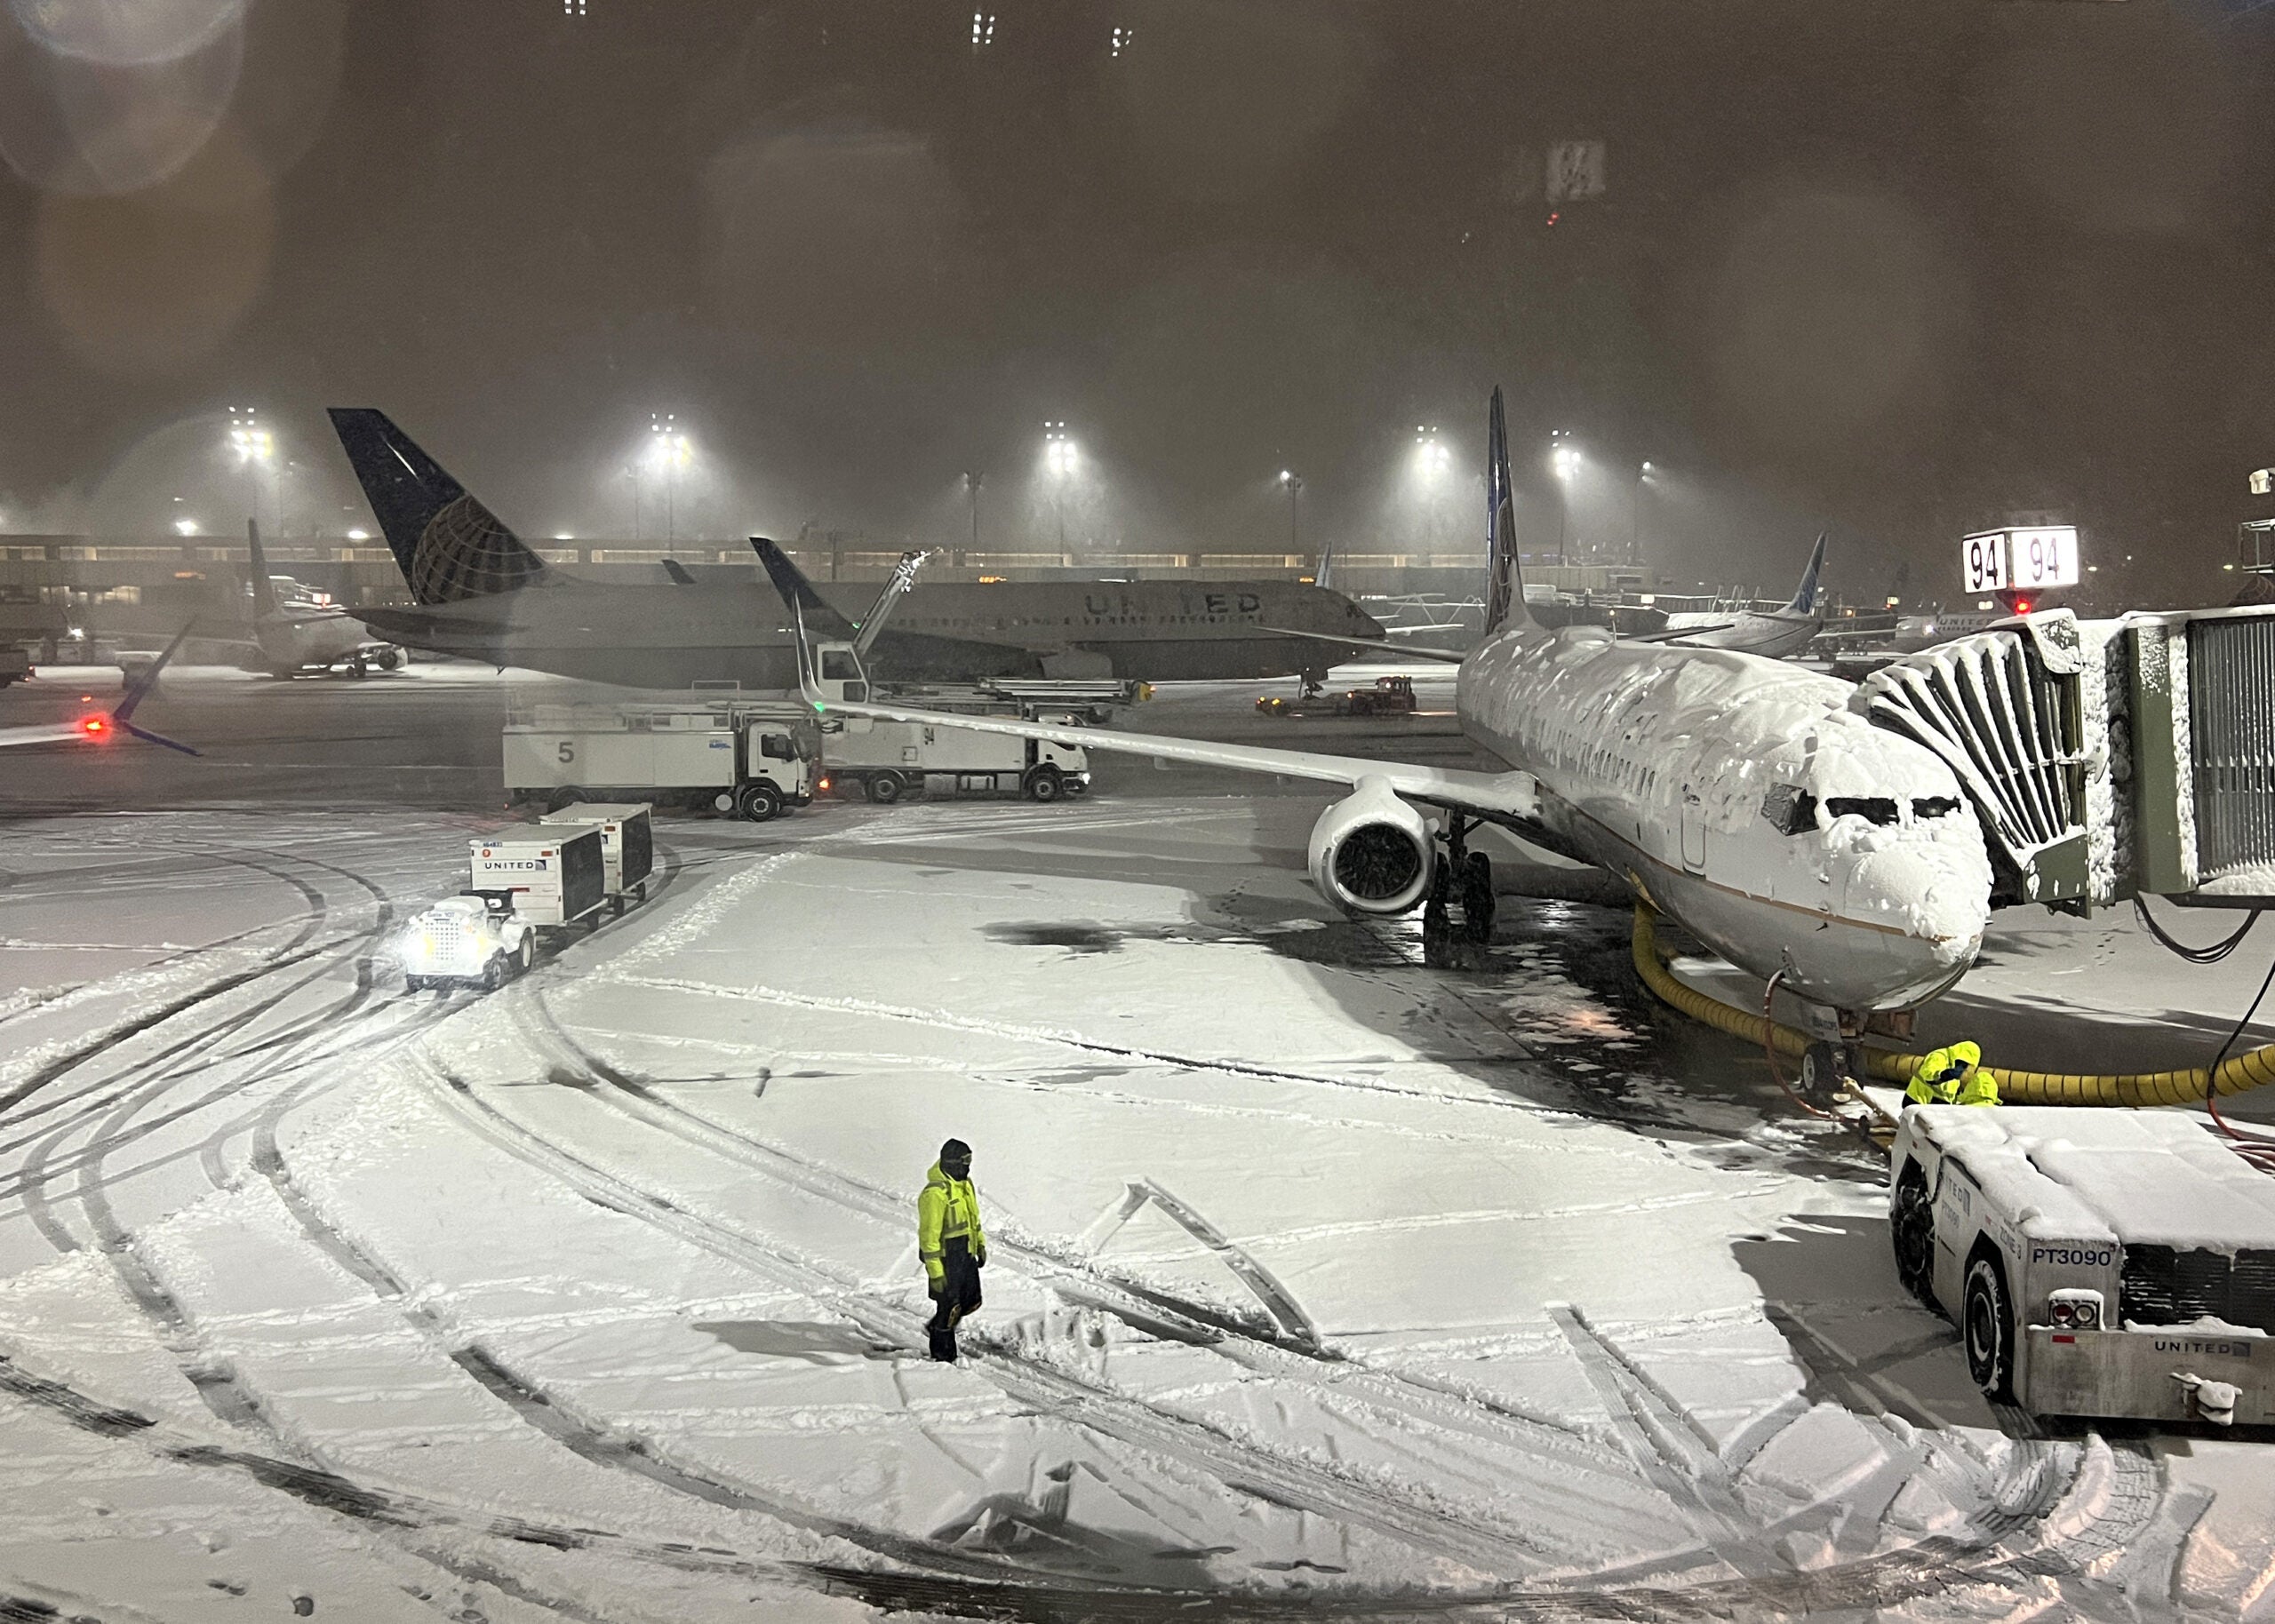 Airplane runway covered with snow at Newark Liberty International Airport on January 7, 2022 in New Jersey, United States as massive snow storm hits the east coast. (Photo by Tayfun Coskun/Anadolu Agency via Getty Images)